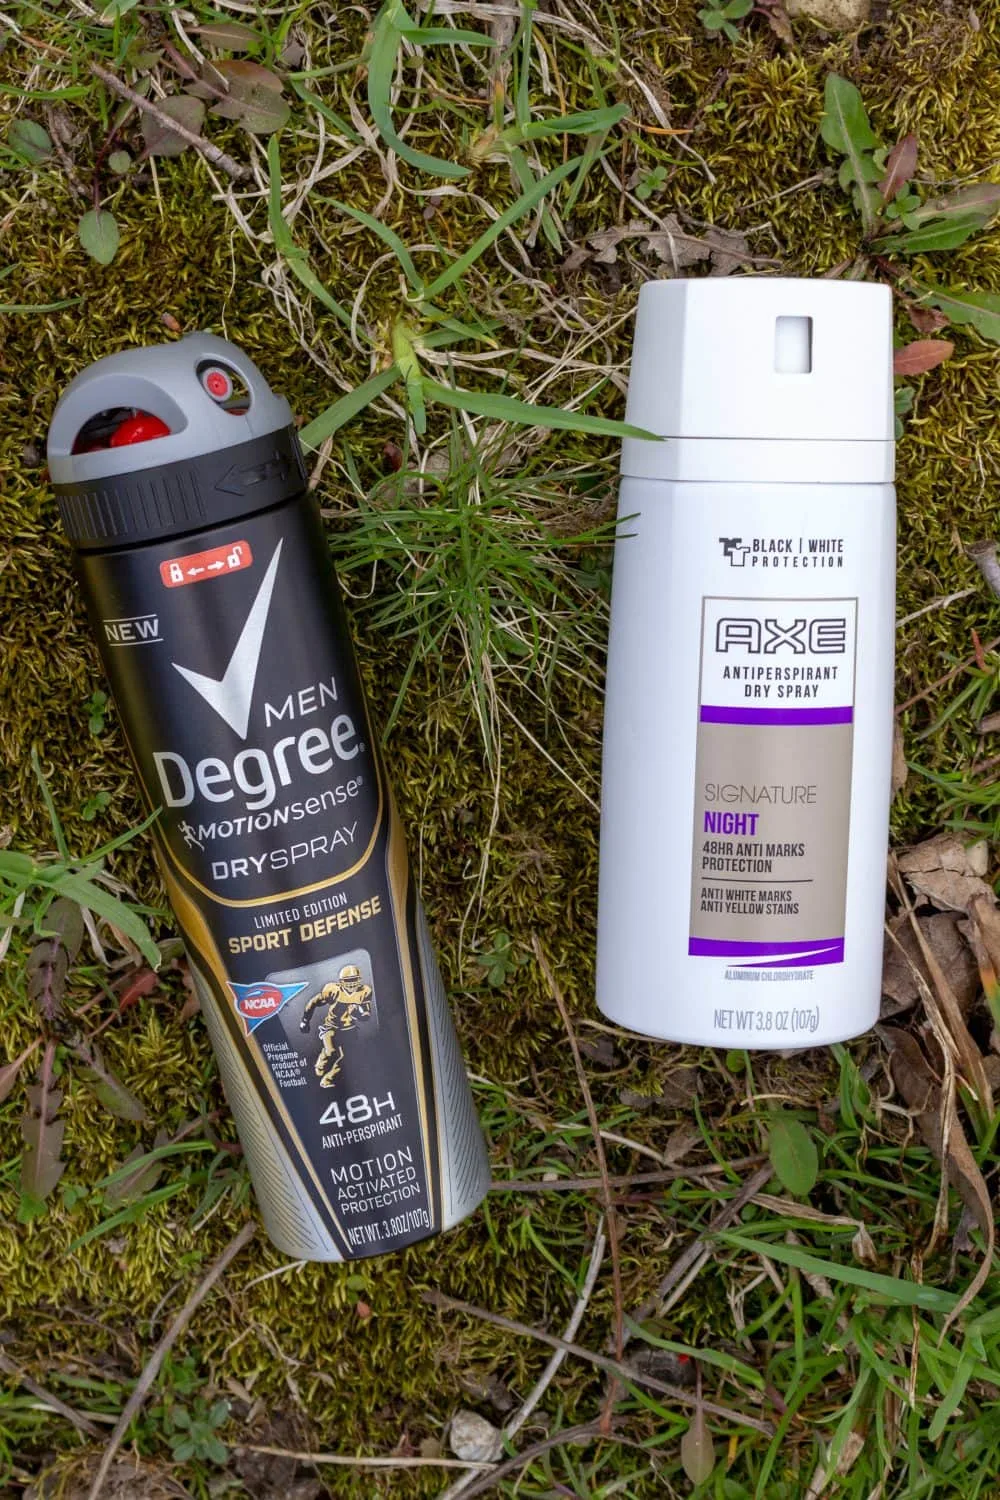 Men's Degree and Axe antiperspirant in the grass. 